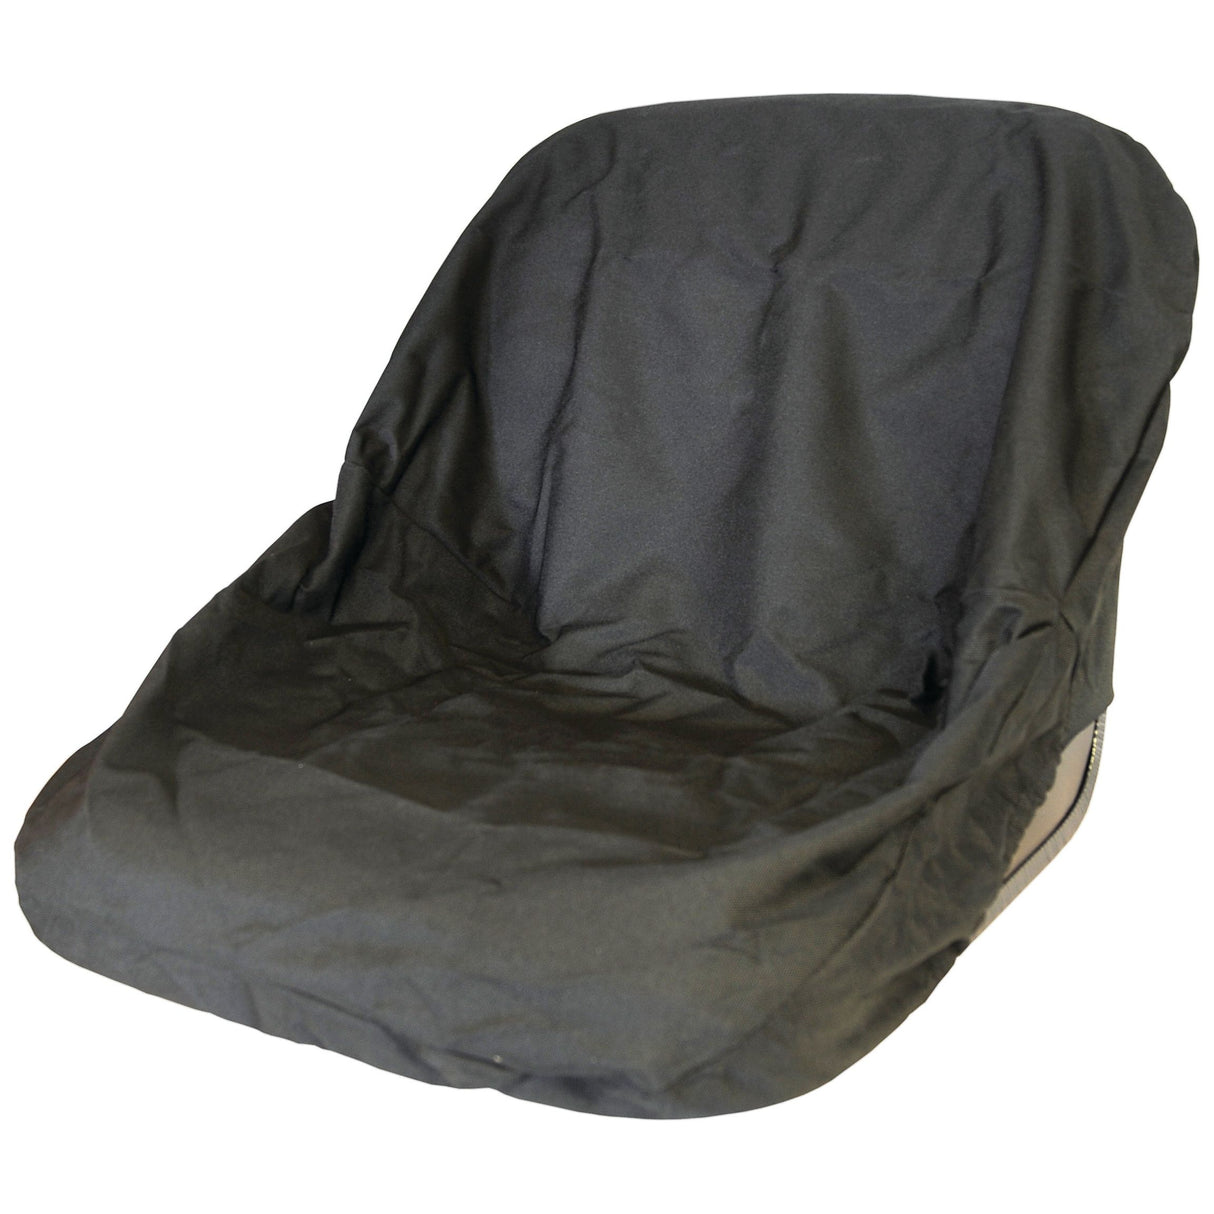 Compact Tractor Seat Cover - Compact Tractor
 - S.71720 - Massey Tractor Parts